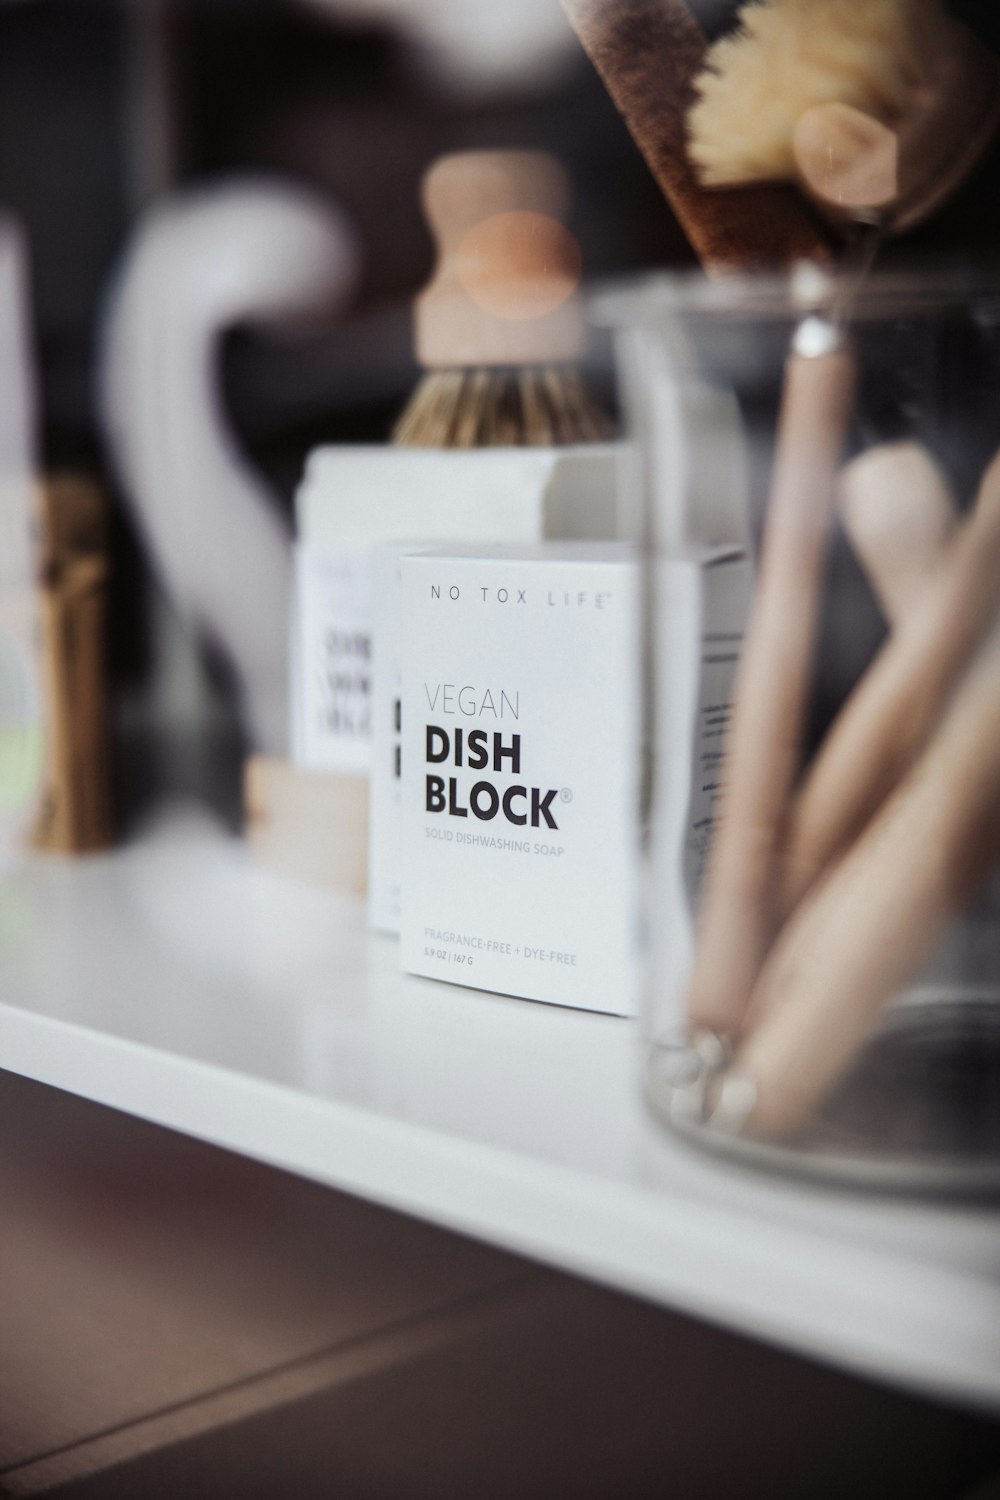 a close up of a bottle of dish block on a counter